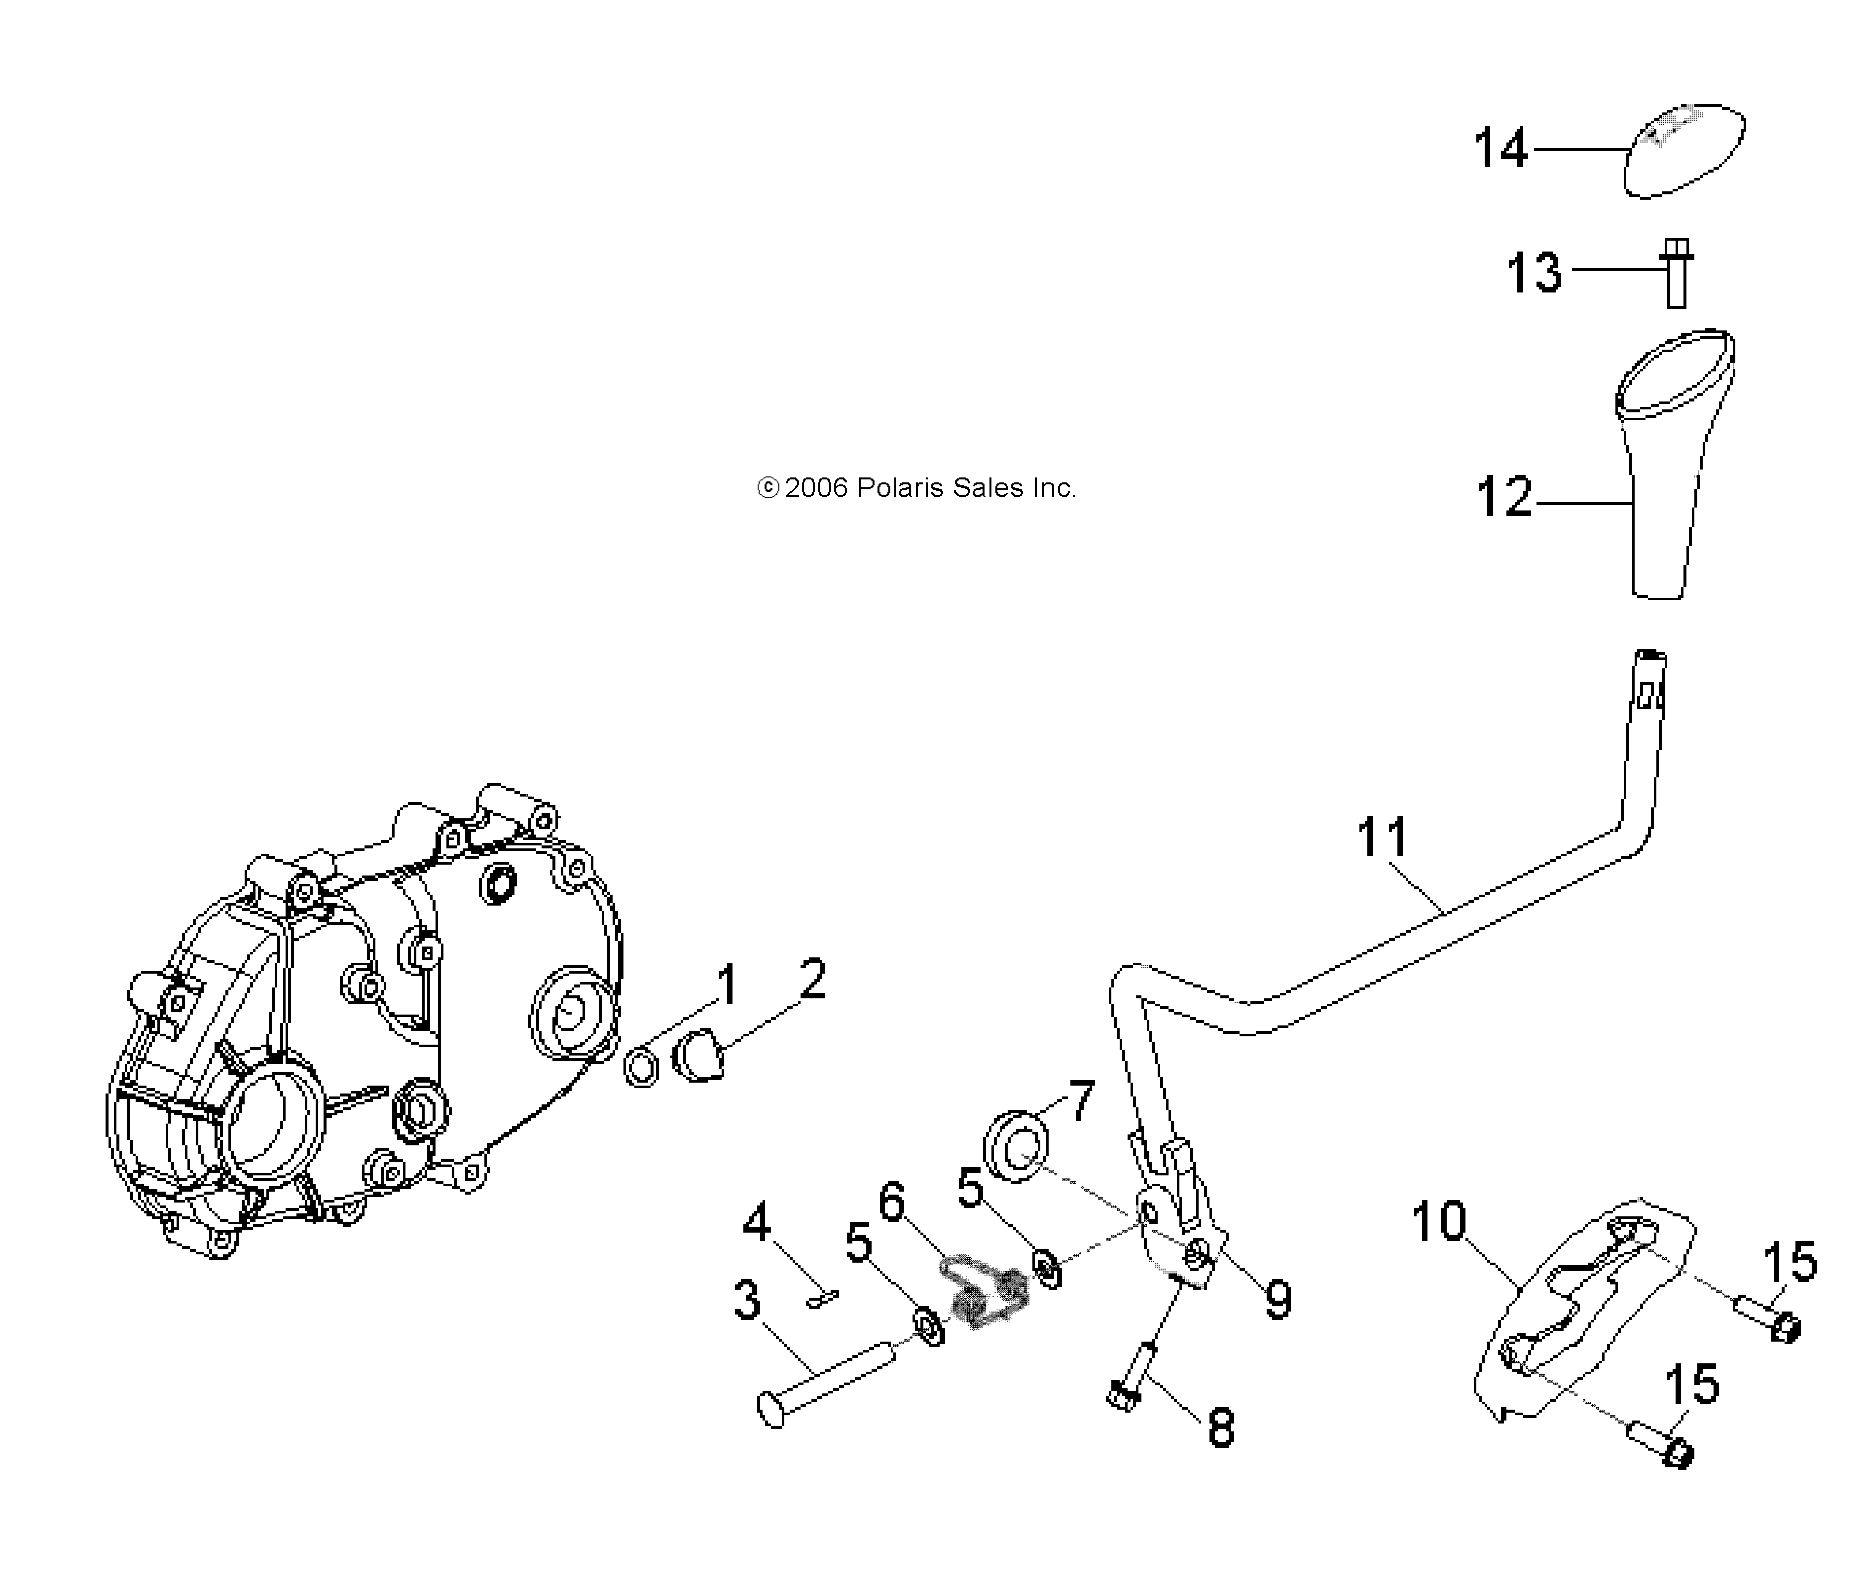 Part Number : 0453652 CONNECTOR-LEVER SHIFT